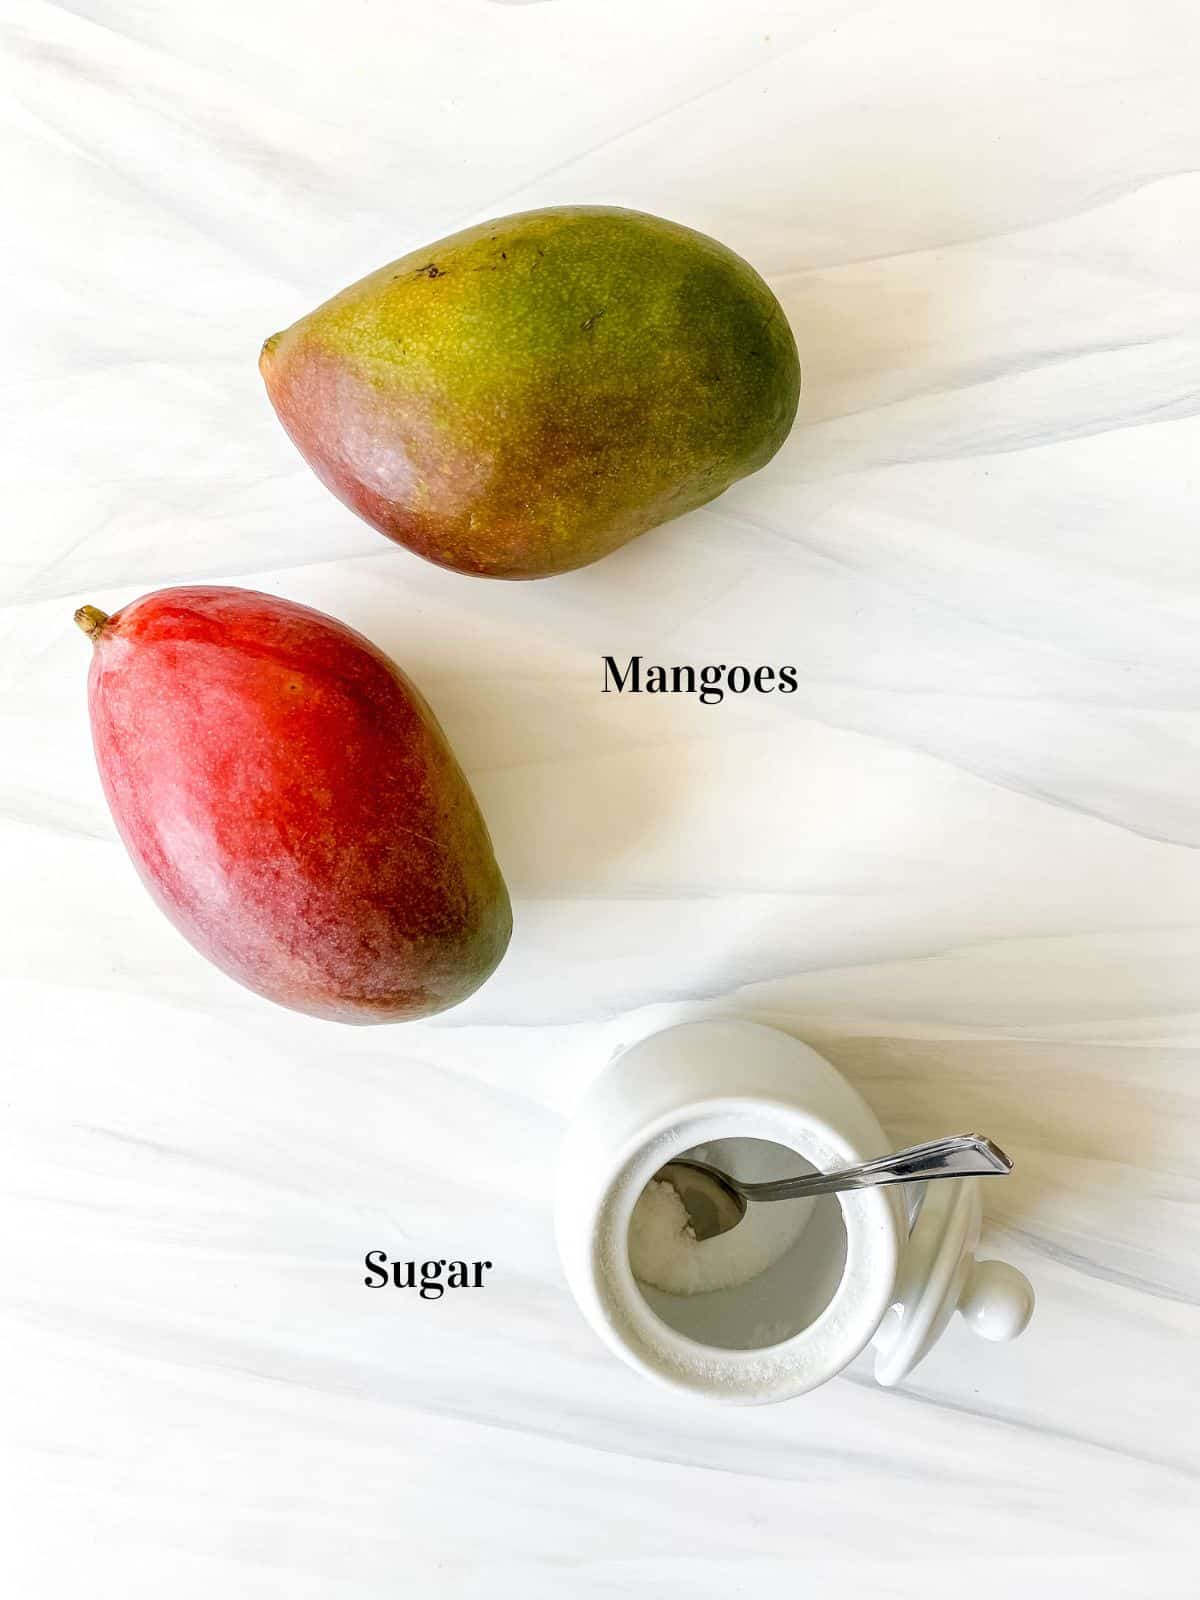 labelled mangoes and a white bowl of sugar with a spoon in it.